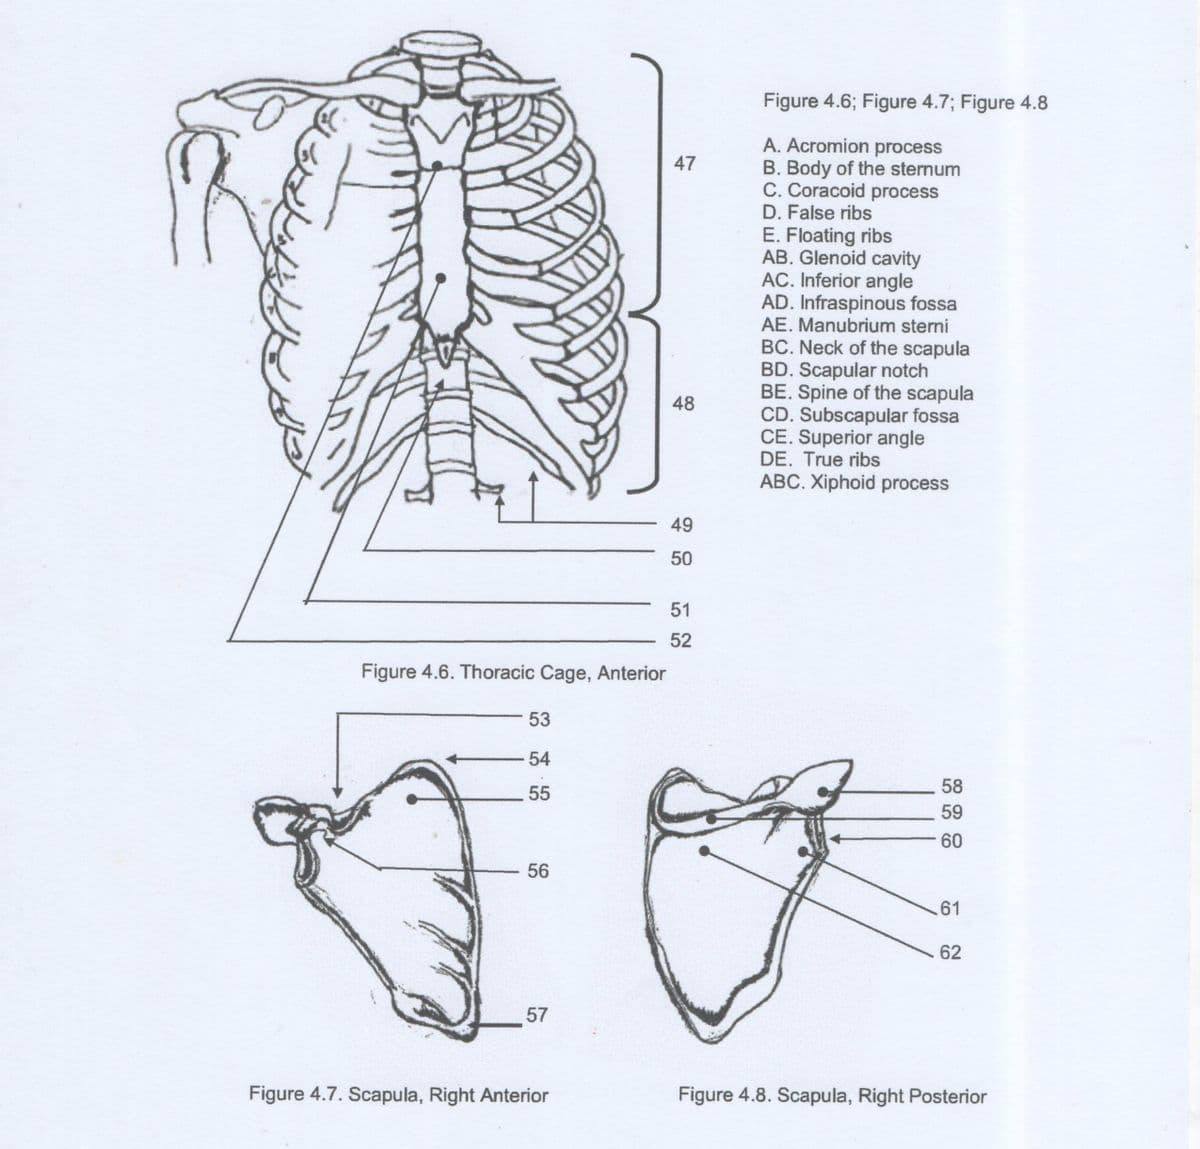 Figure 4.6; Figure 4.7; Figure 4.8
A. Acromion process
B. Body of the sternum
C. Coracoid process
D. False ribs
47
E. Floating ribs
AB. Glenoid cavity
AC. Inferior angle
AD. Infraspinous fossa
AE. Manubrium sterni
BC. Neck of the scapula
BD. Scapular notch
BE. Spine of the scapula
CD. Subscapular fossa
CE. Superior angle
DE. True ribs
ABC. Xiphoid process
48
49
50
51
52
Figure 4.6. Thoracic Cage, Anterior
53
54
55
58
59
60
56
.61
62
57
Figure 4.7. Scapula, Right Anterior
Figure 4.8. Scapula, Right Posterior
